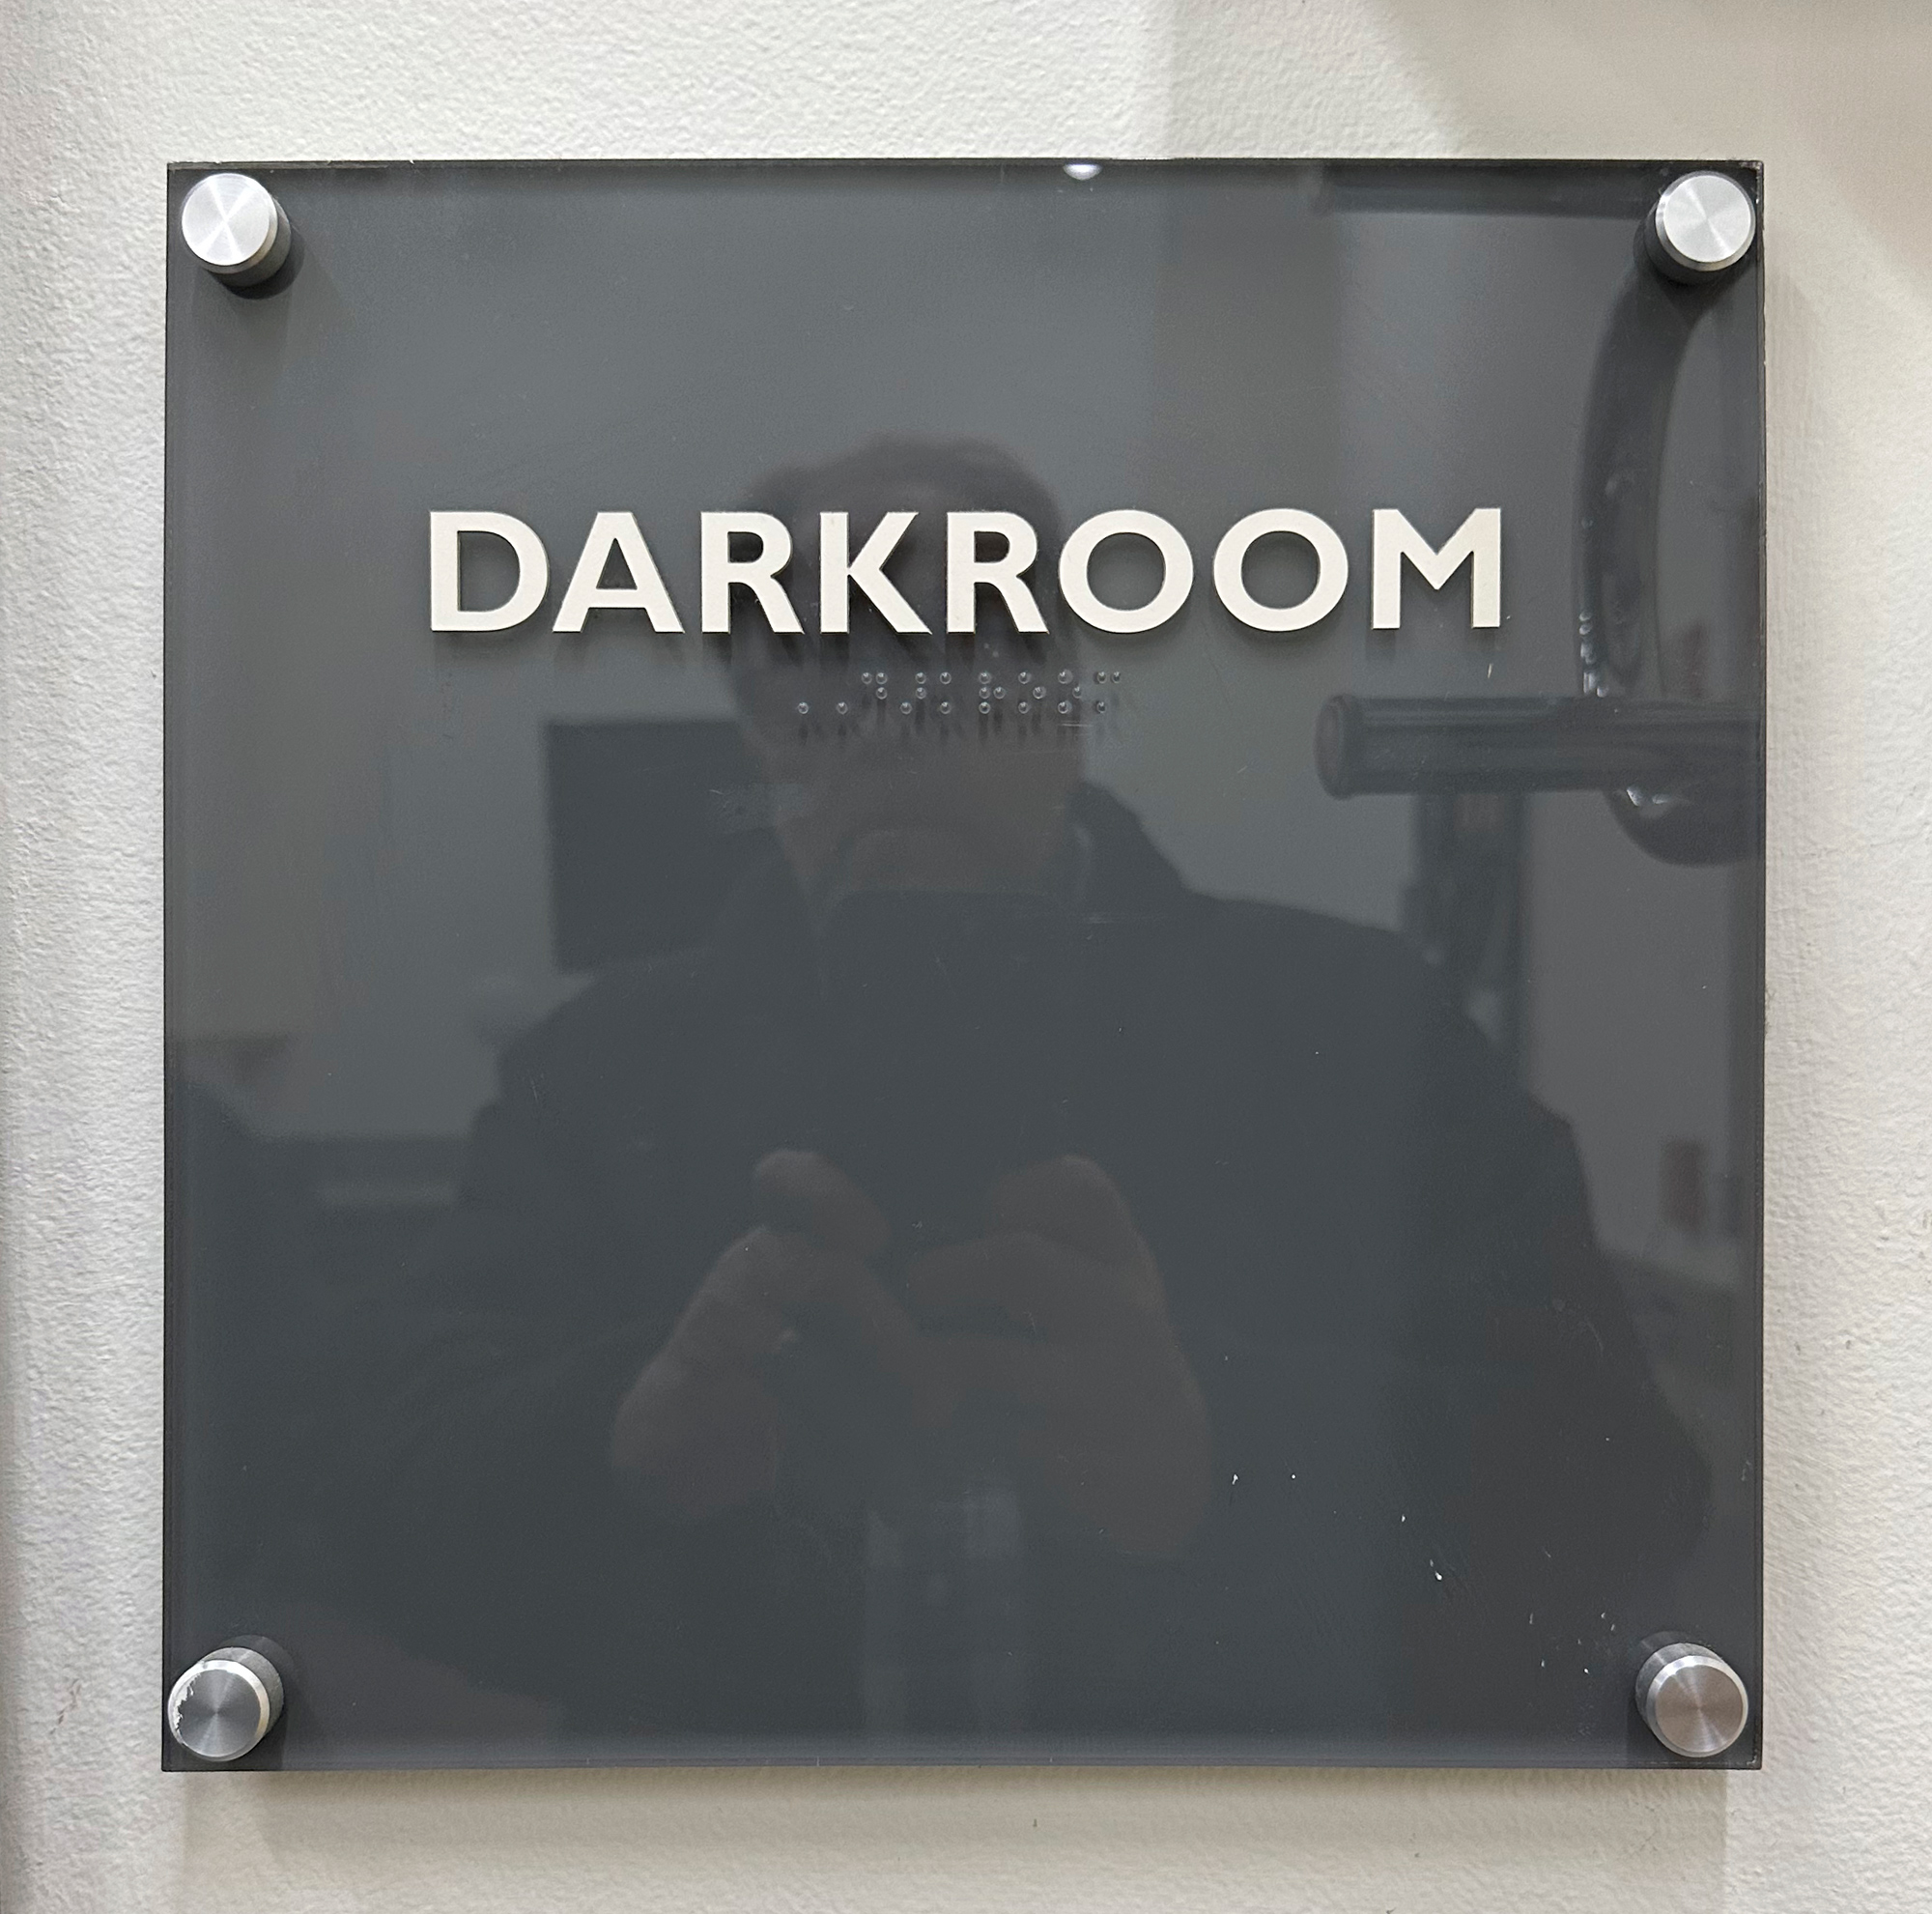 Wow . . a real darkroom sign and in braile too